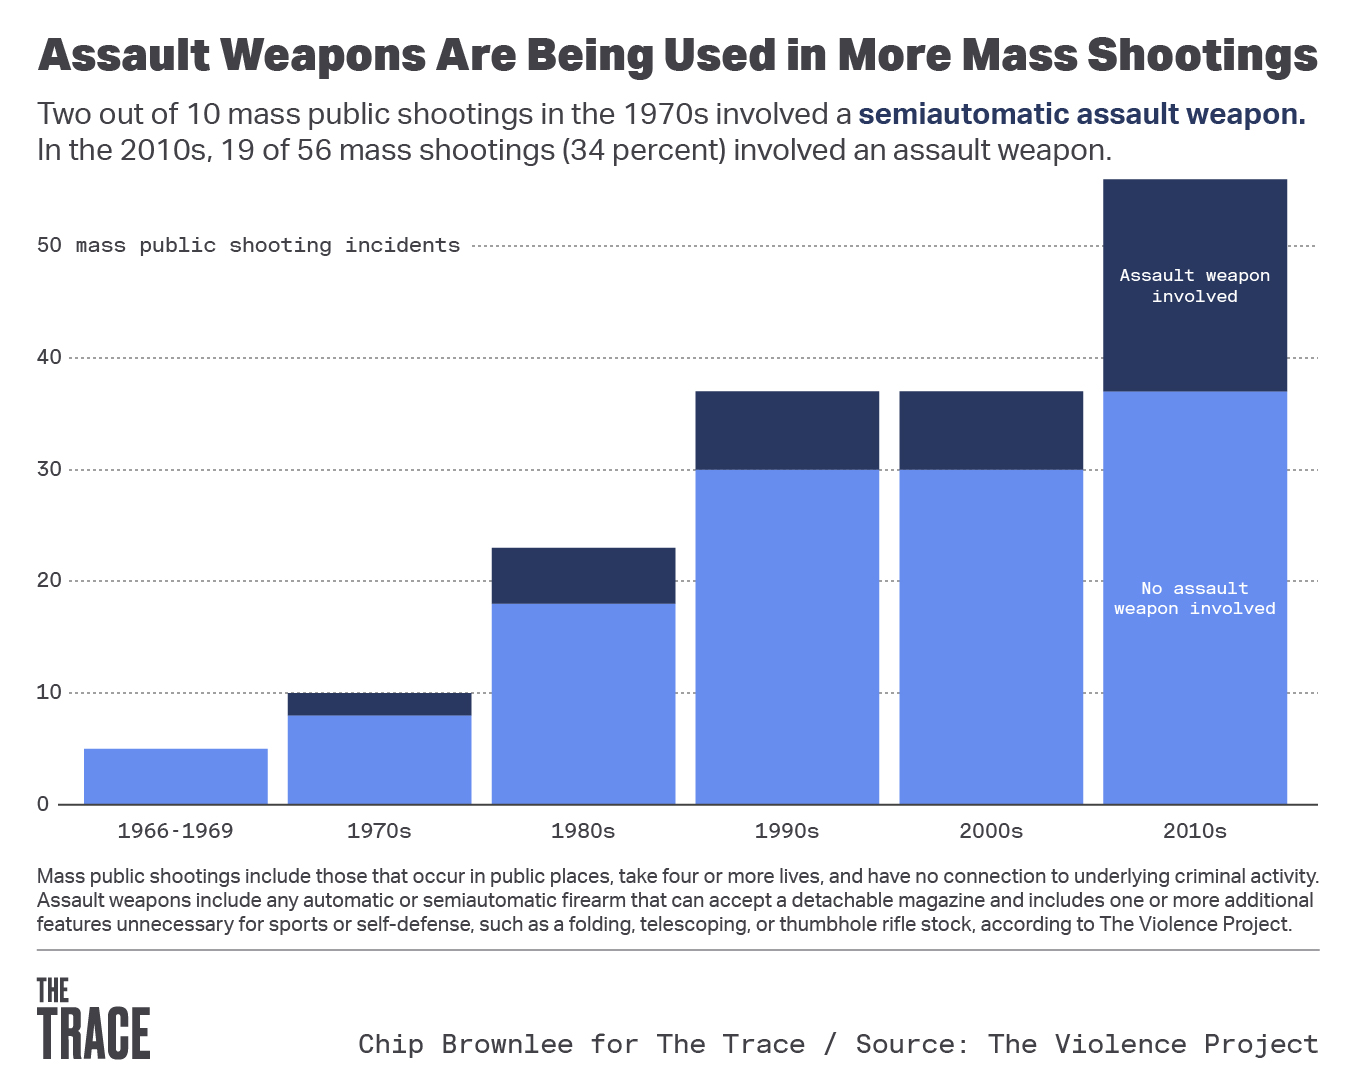 Are Handguns or Rifles Used More Often in Mass Shootings?